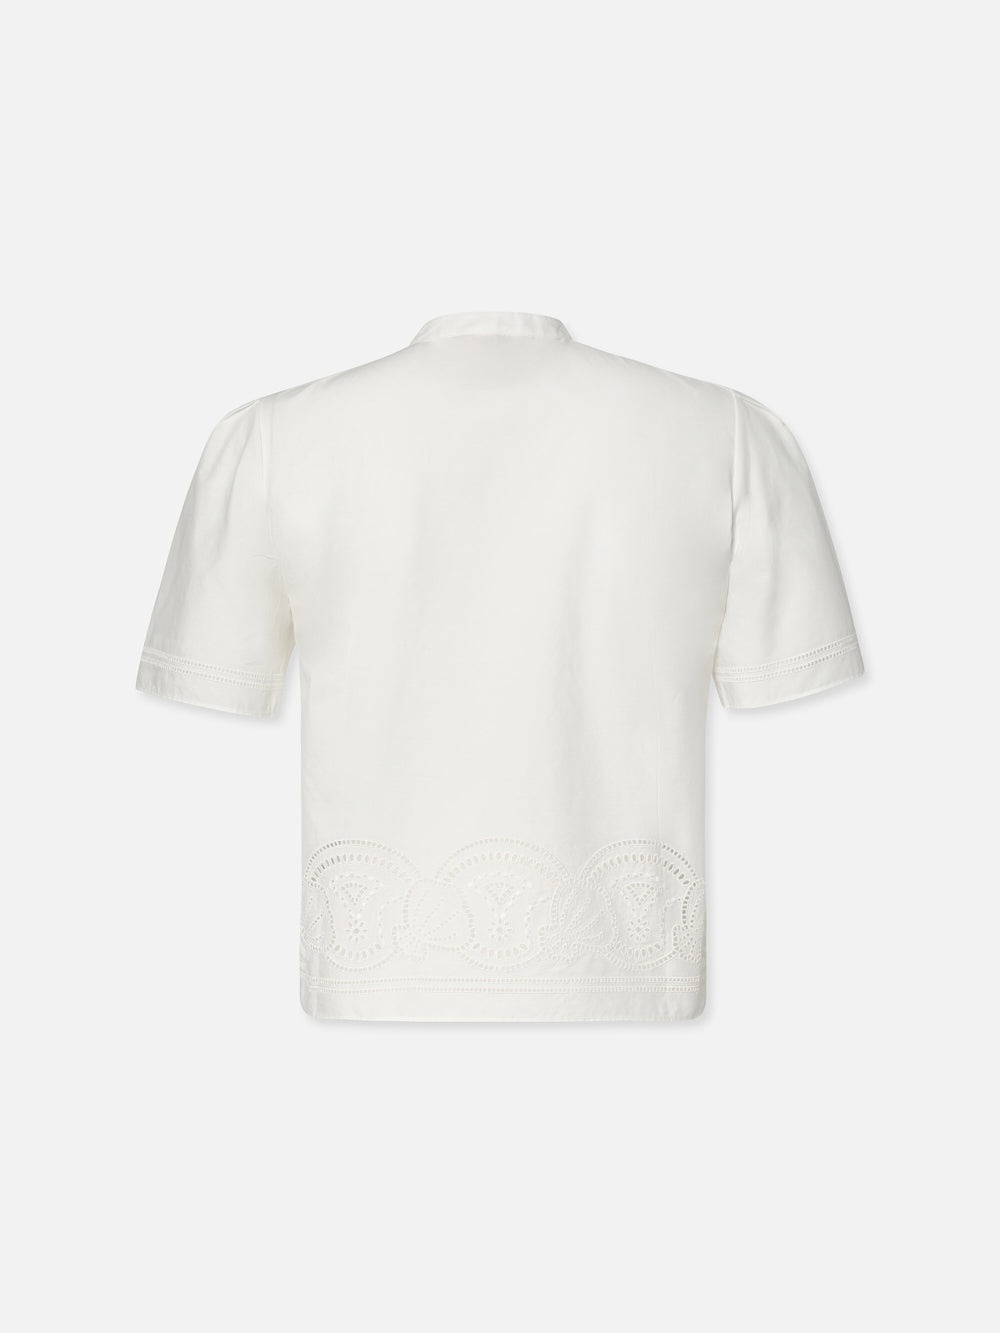 Embroidered Short Sleeve Shirt in White - 4